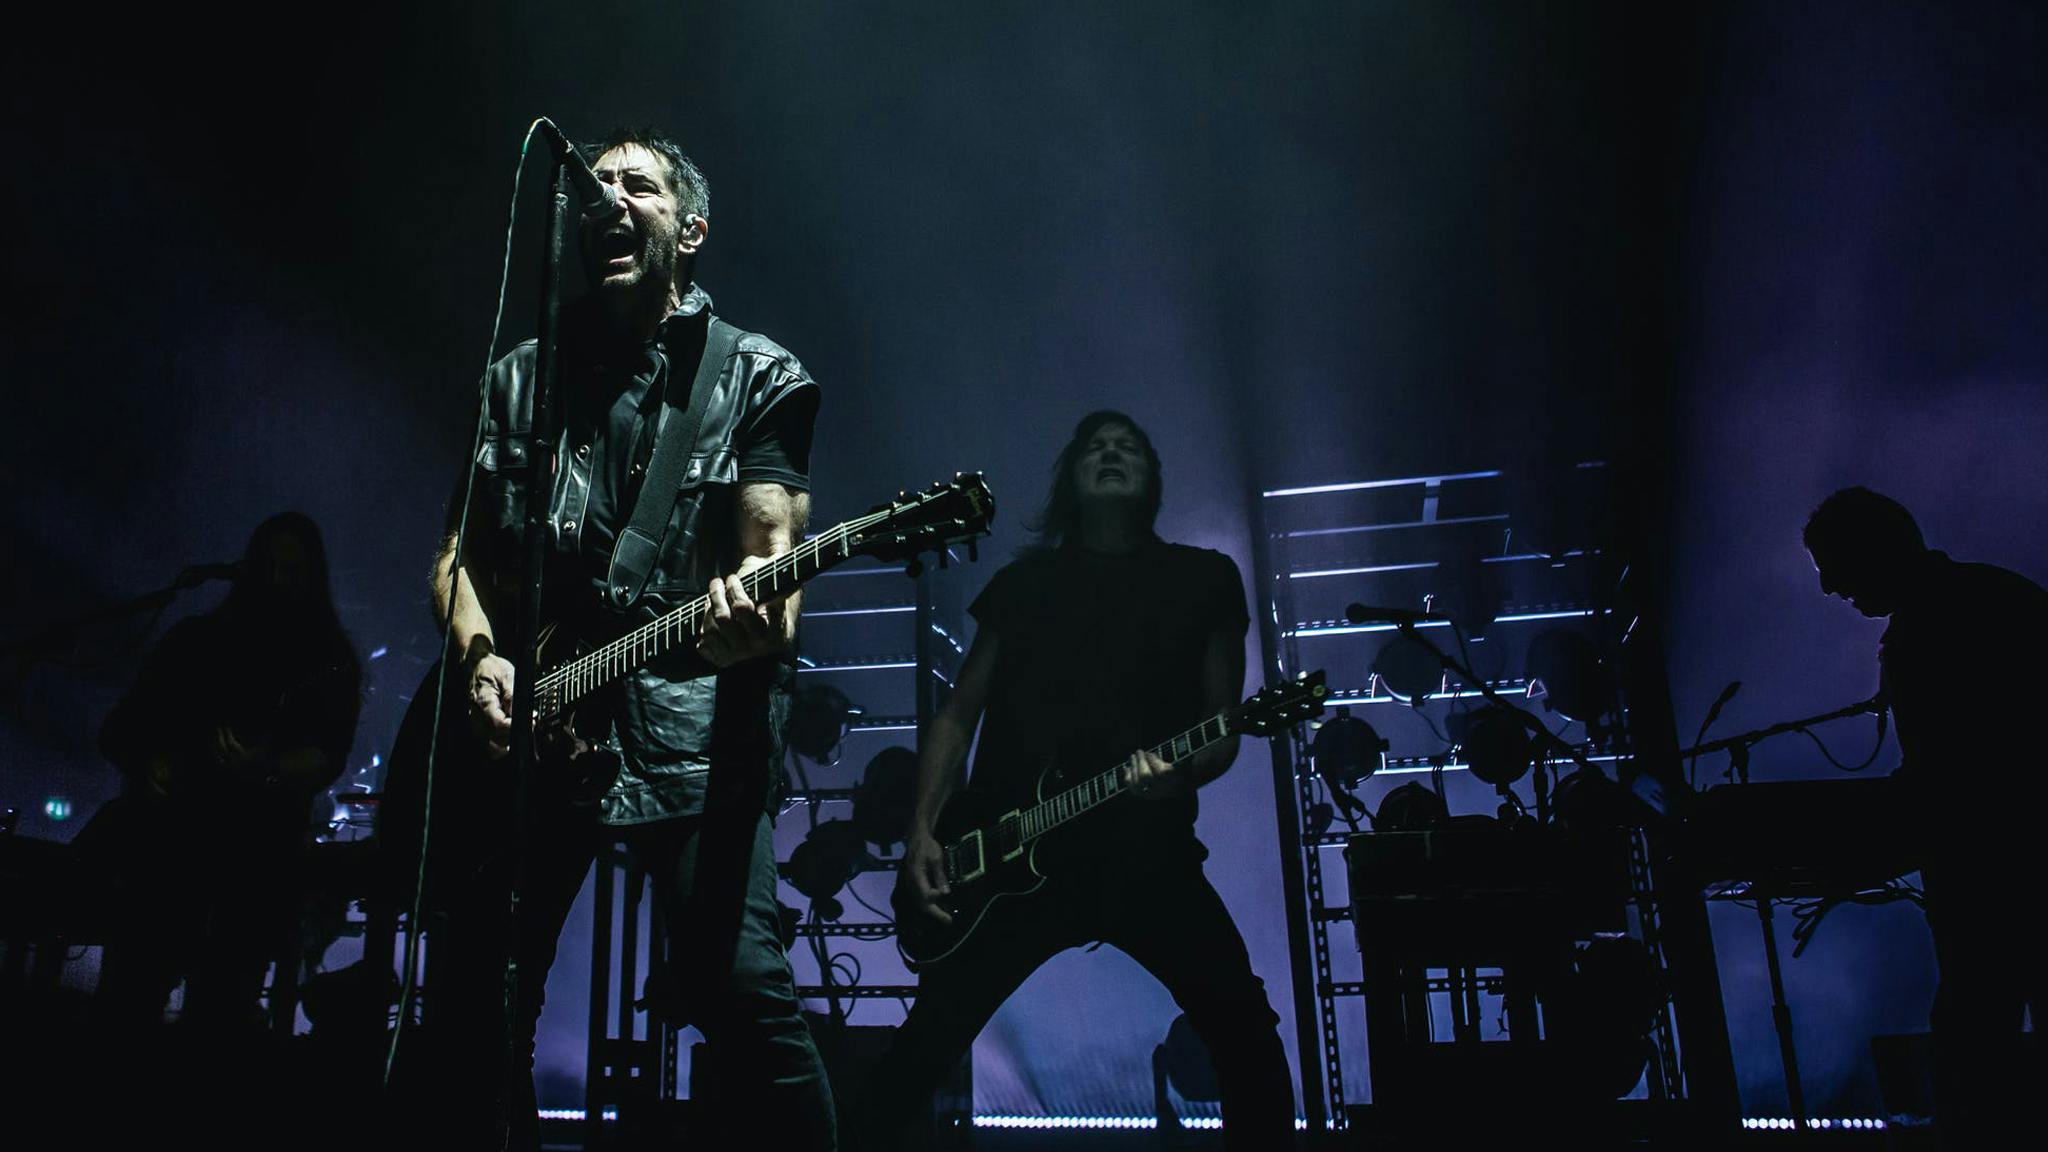 Live review: Nine Inch Nails, London O2 Academy Brixton